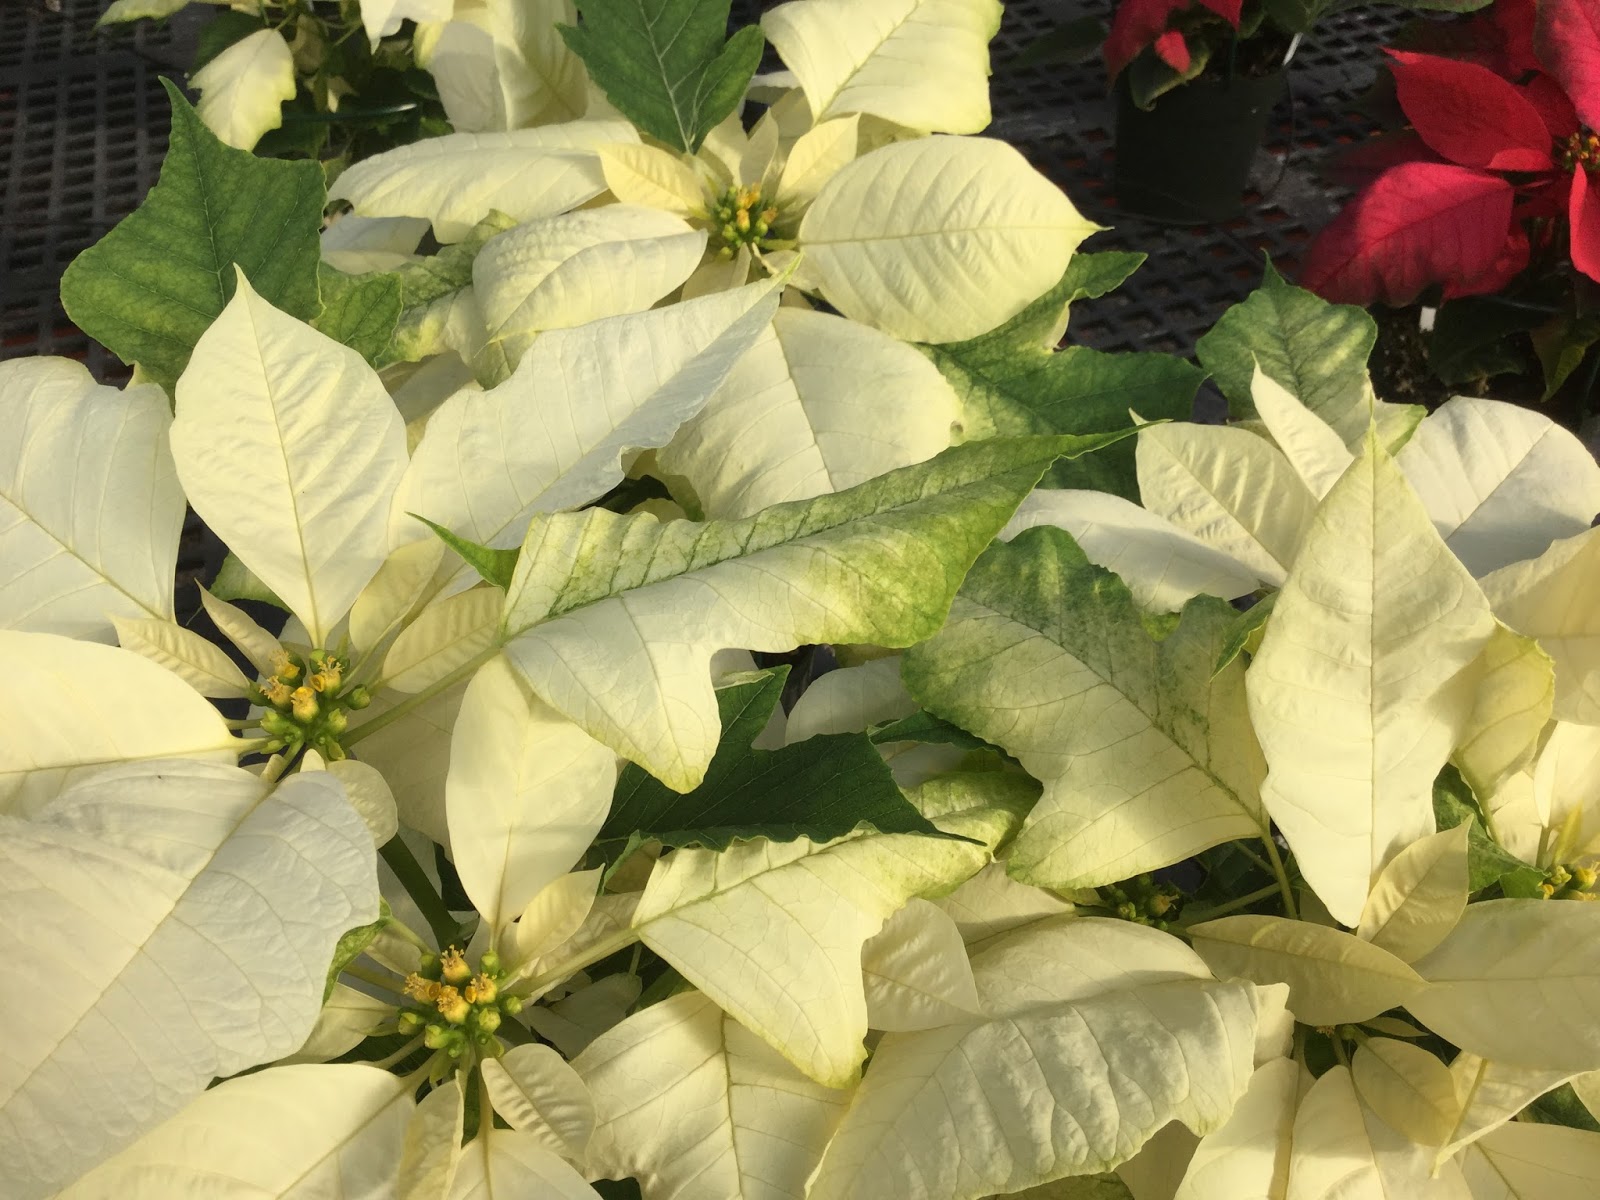 CO-Horts: How to Save Your Holiday Poinsettia: